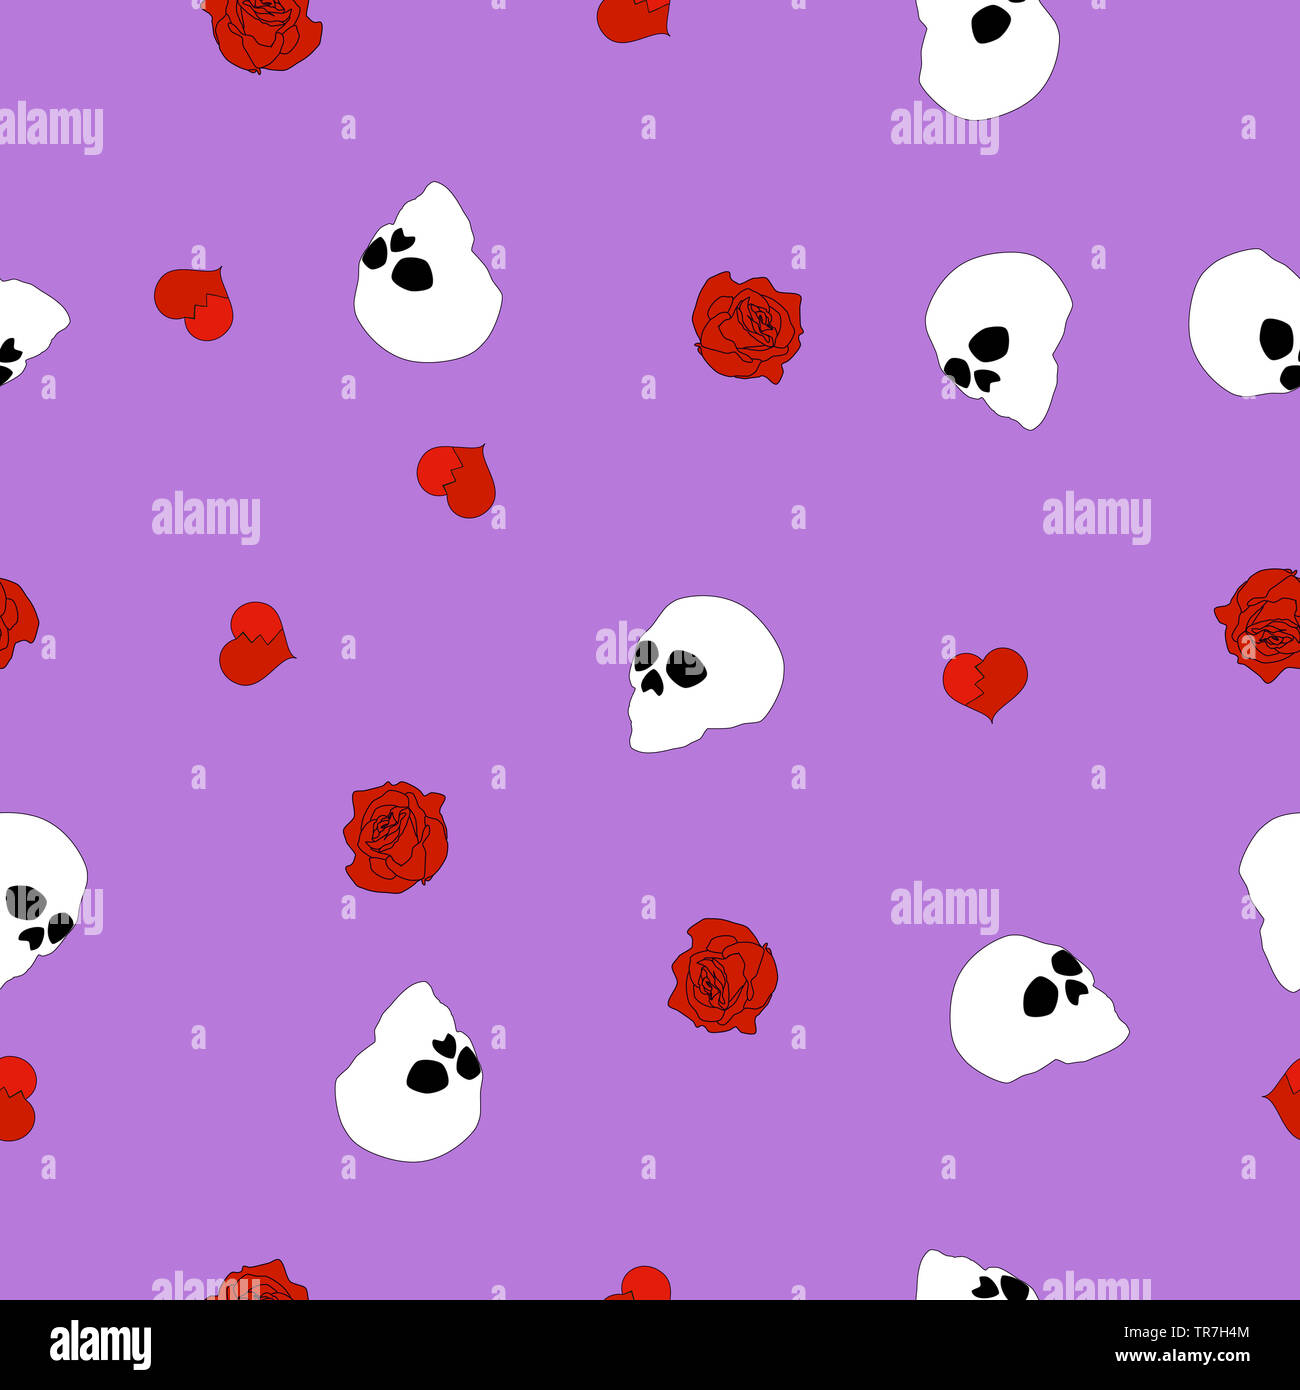 Premium Photo  Purple and black wallpaper with a purple background and a  white skull in the middle